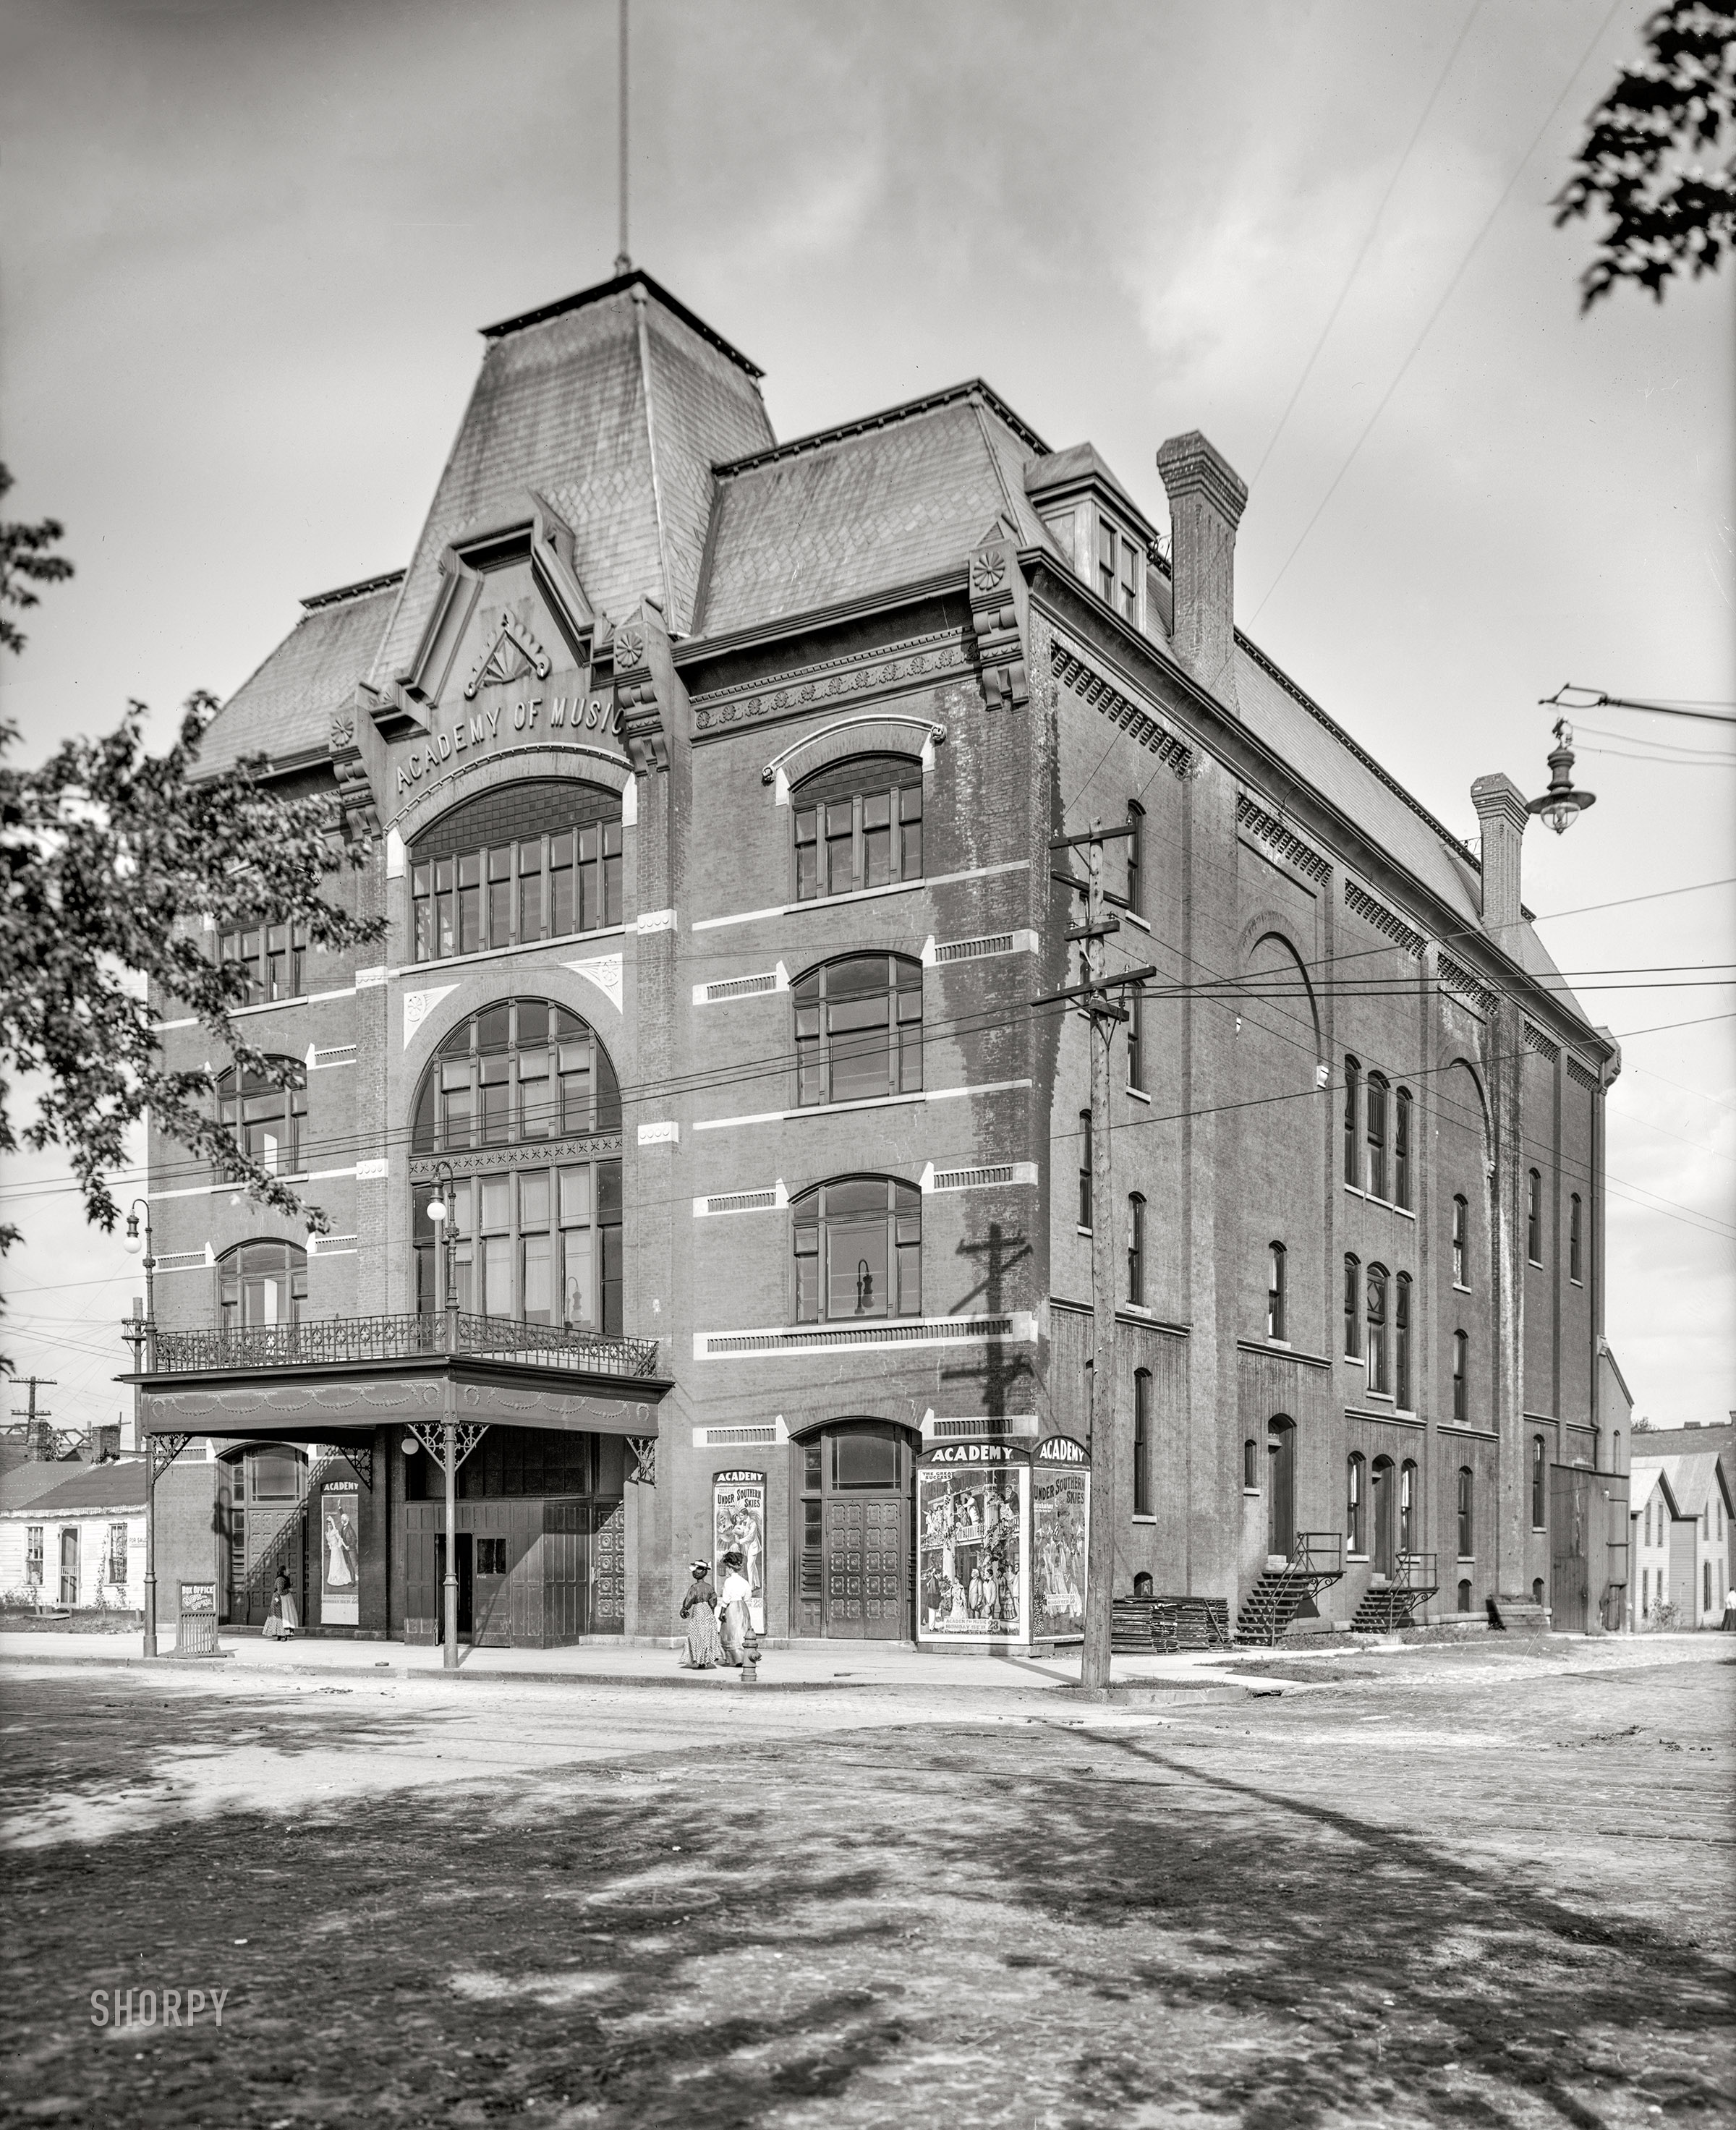 Saginaw, Michigan, circa 1907. "Academy of Music, Washington Avenue." Coming Sept. 23: the "great success" Under Southern Skies. 8x10 inch glass negative. View full size.